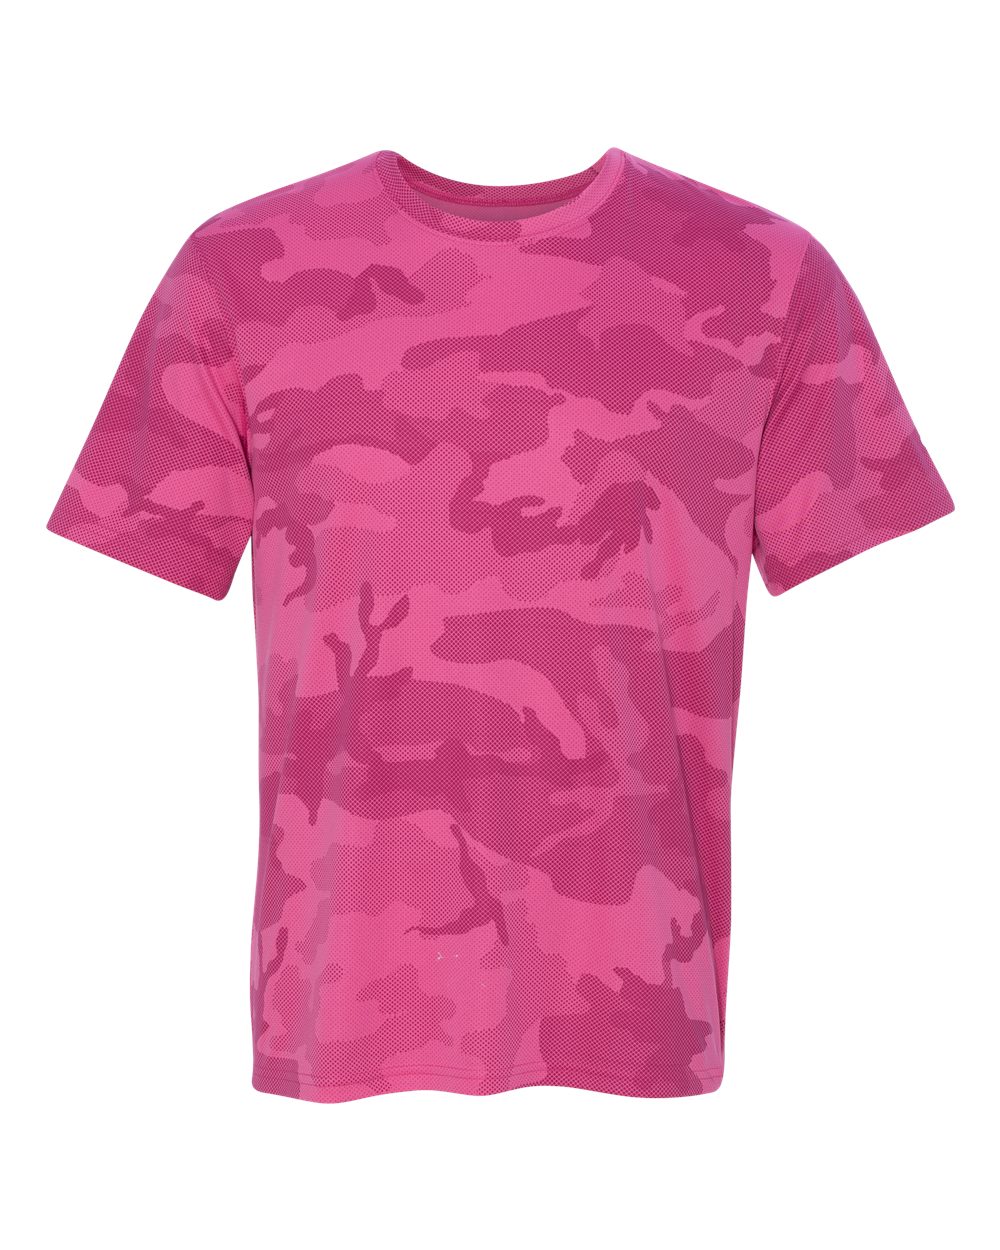 click to view Wow Pink Camo